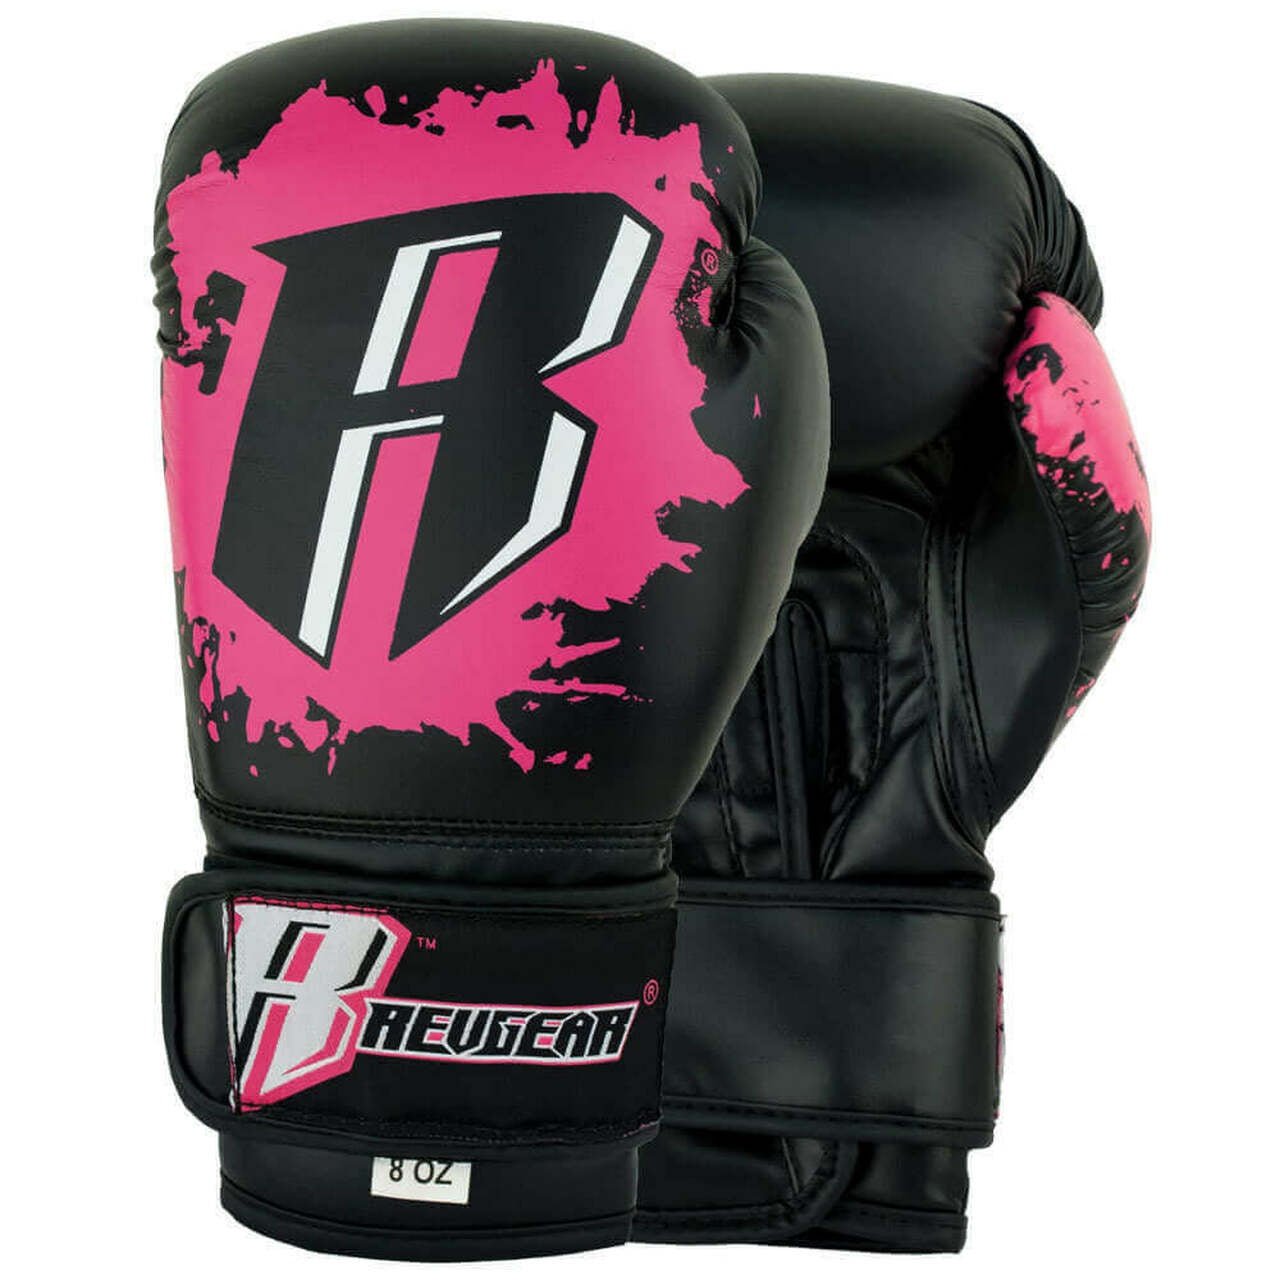 Kids 6oz Deluxe Pink Boxing Gloves